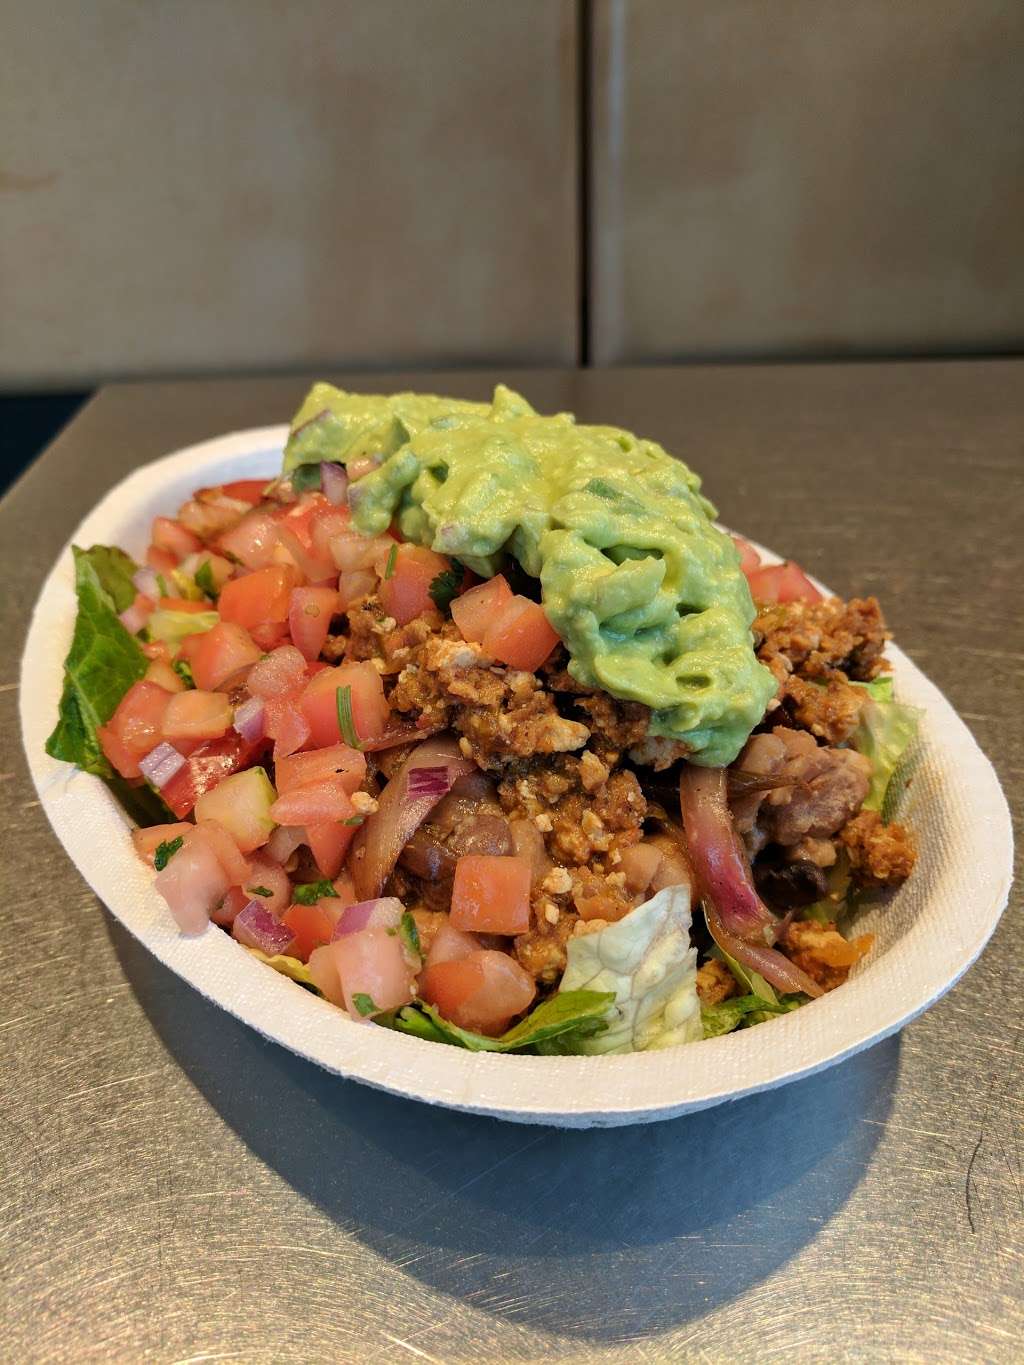 Chipotle Mexican Grill | 3846 Willow Rd, Glenview, IL 60025 | Phone: (847) 513-0016